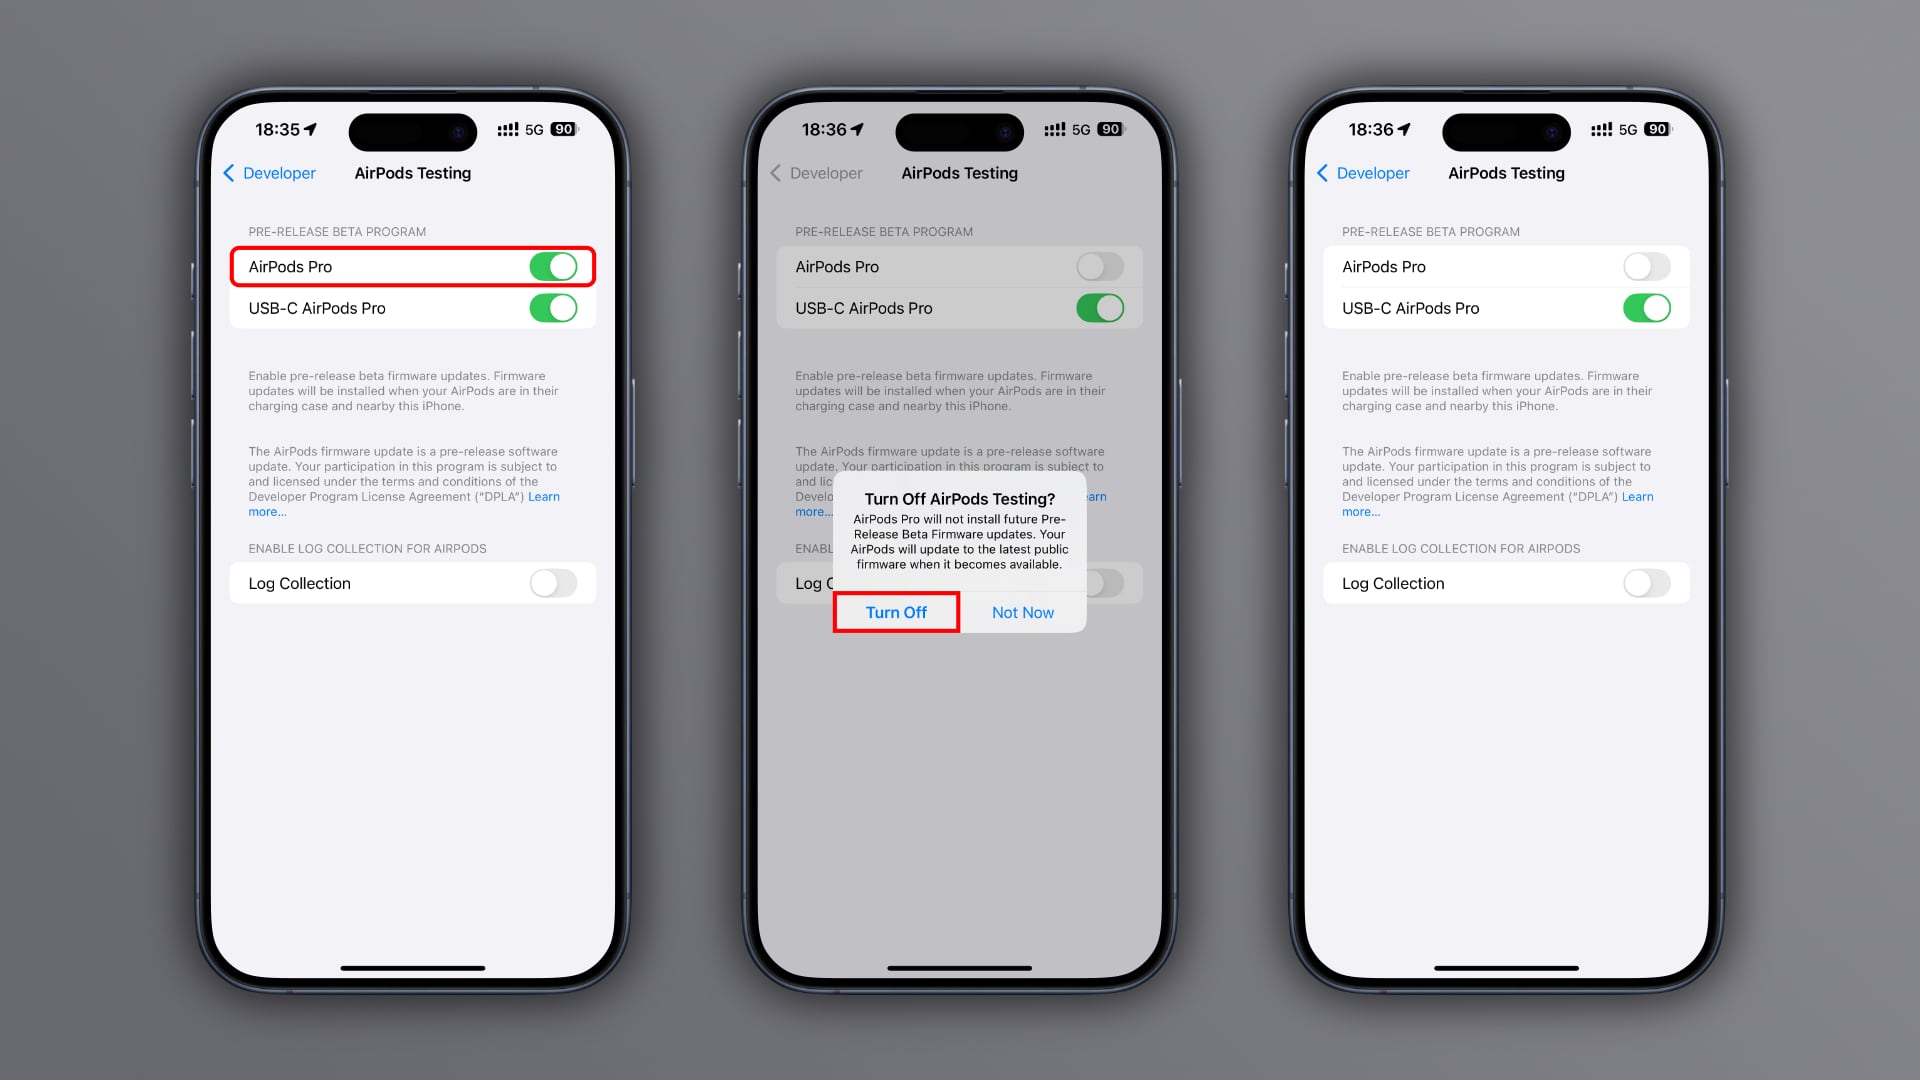 Three iPhone screenshots showing the steps to disable future AirPods beta firmware updates in the Developer section of the Settings app, set against a gray gradient background.